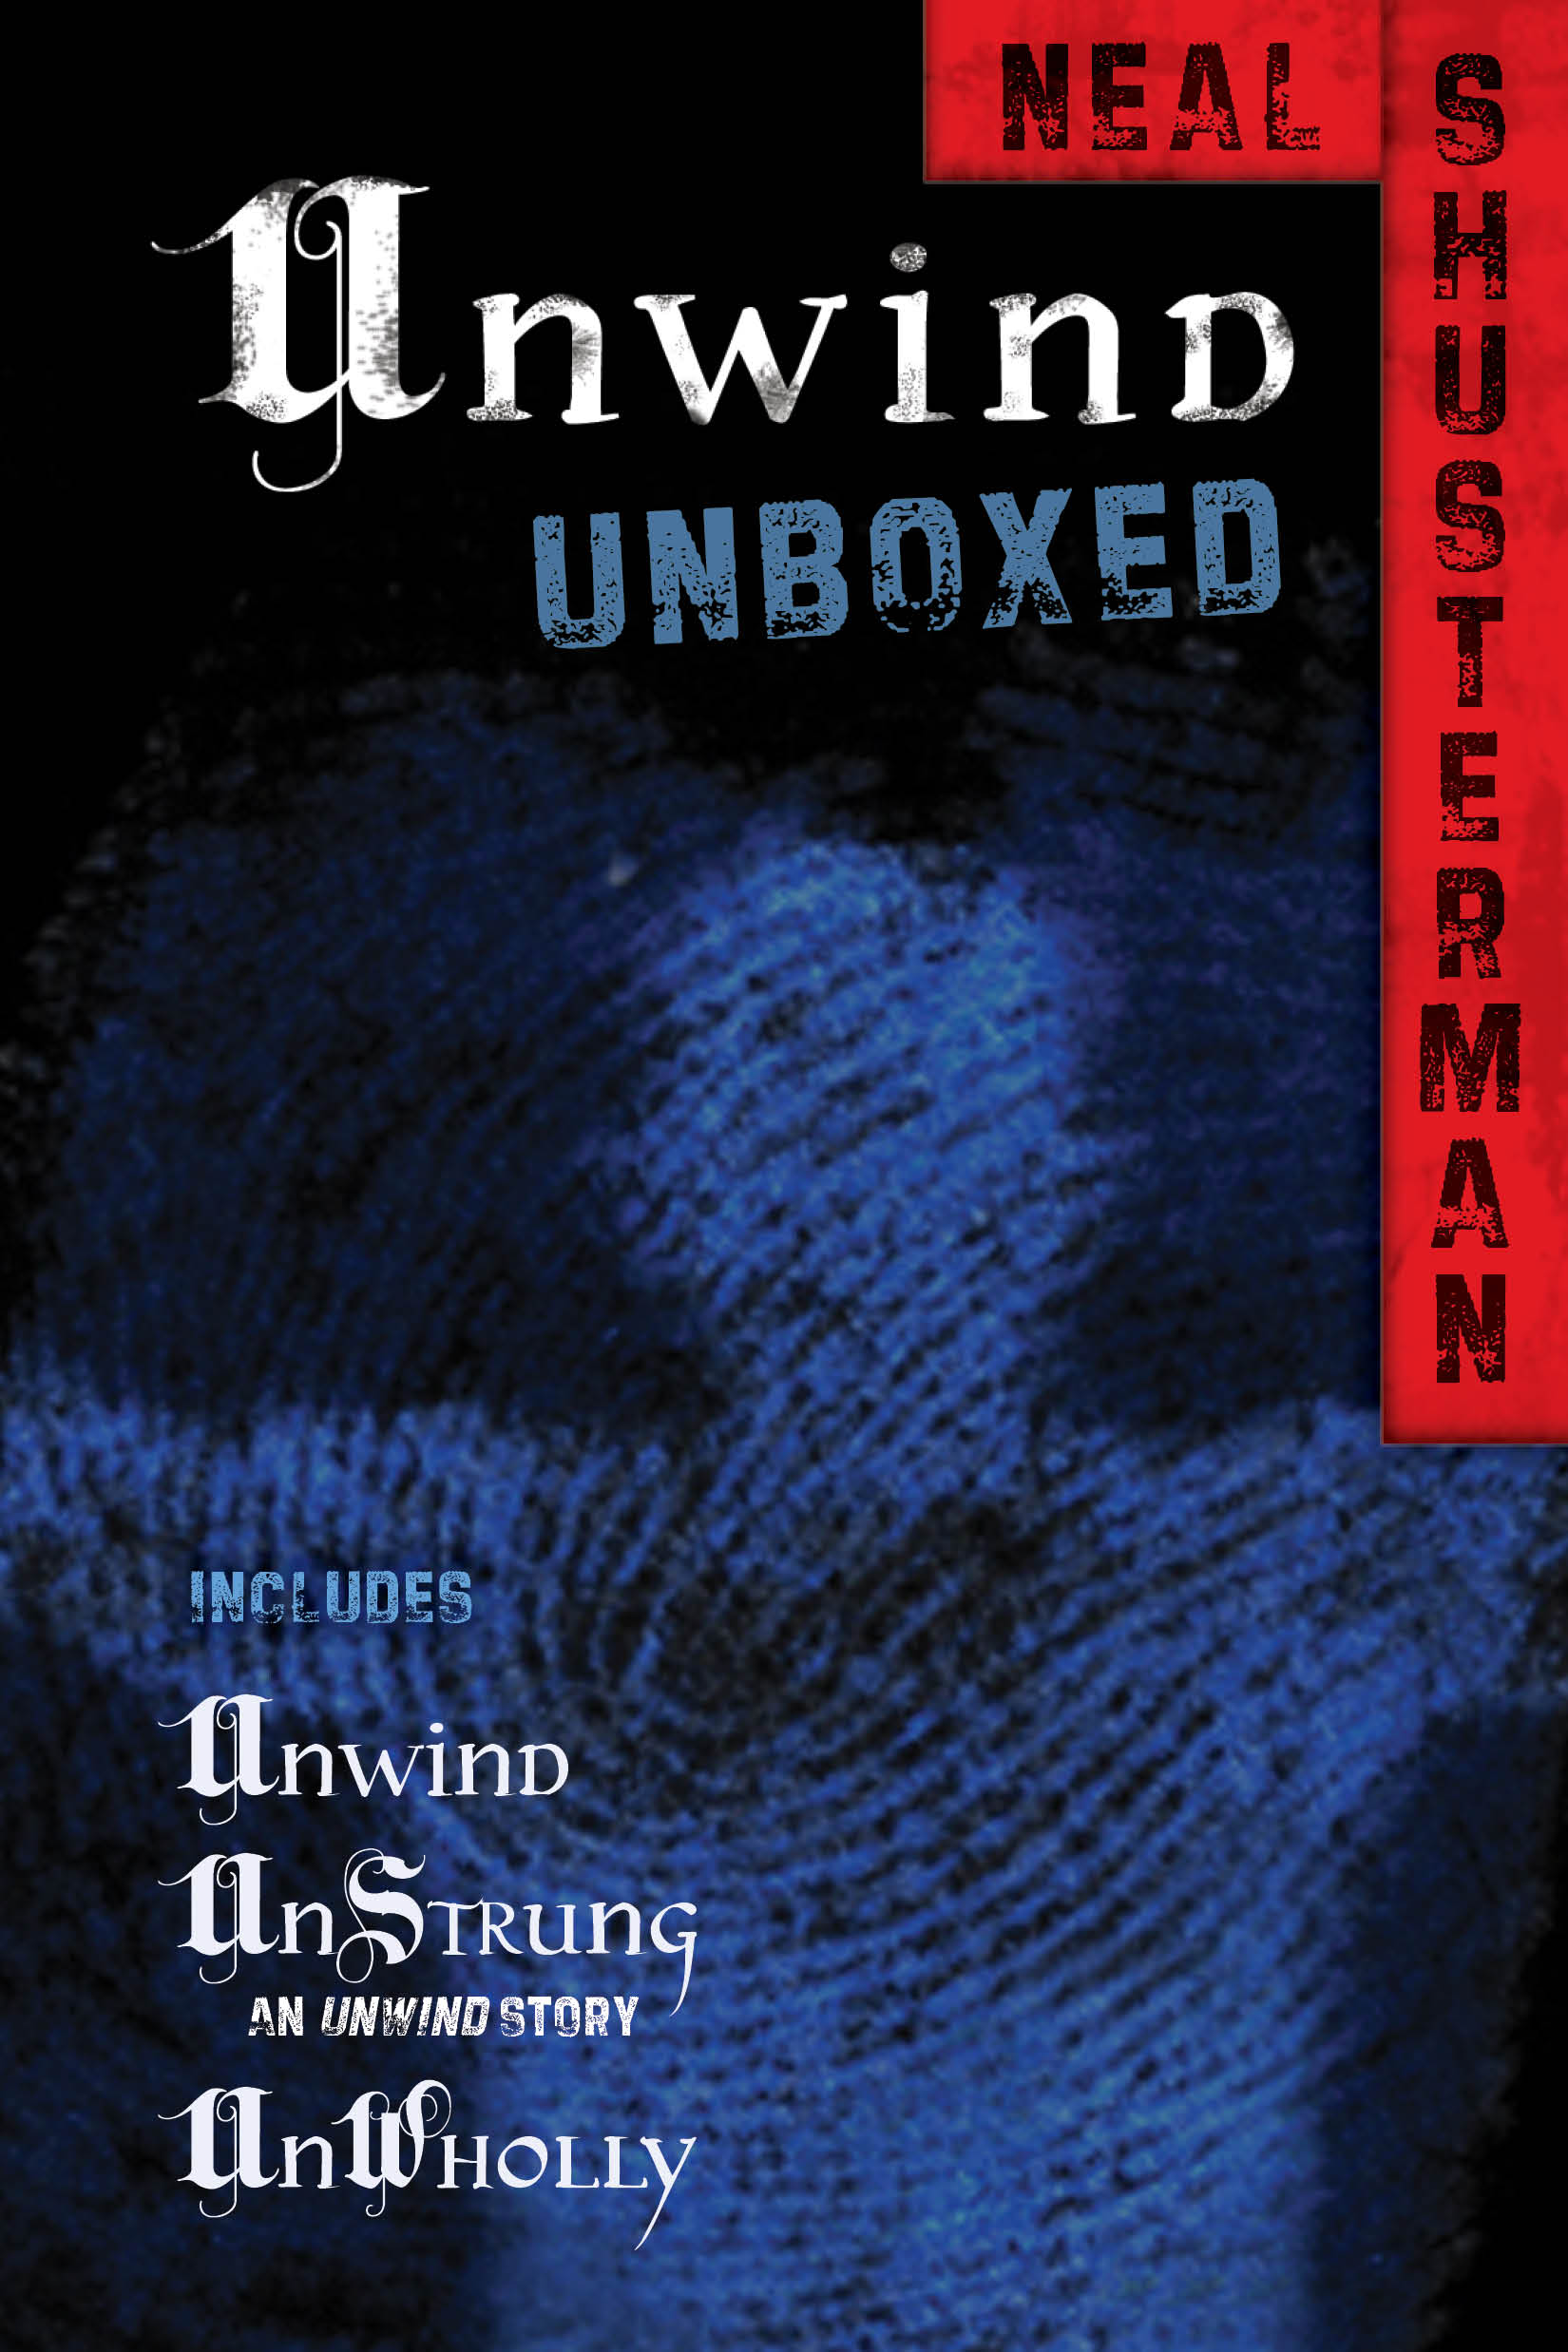 Unwind Unboxed eBook by Neal Shusterman | Official Publisher Page ...